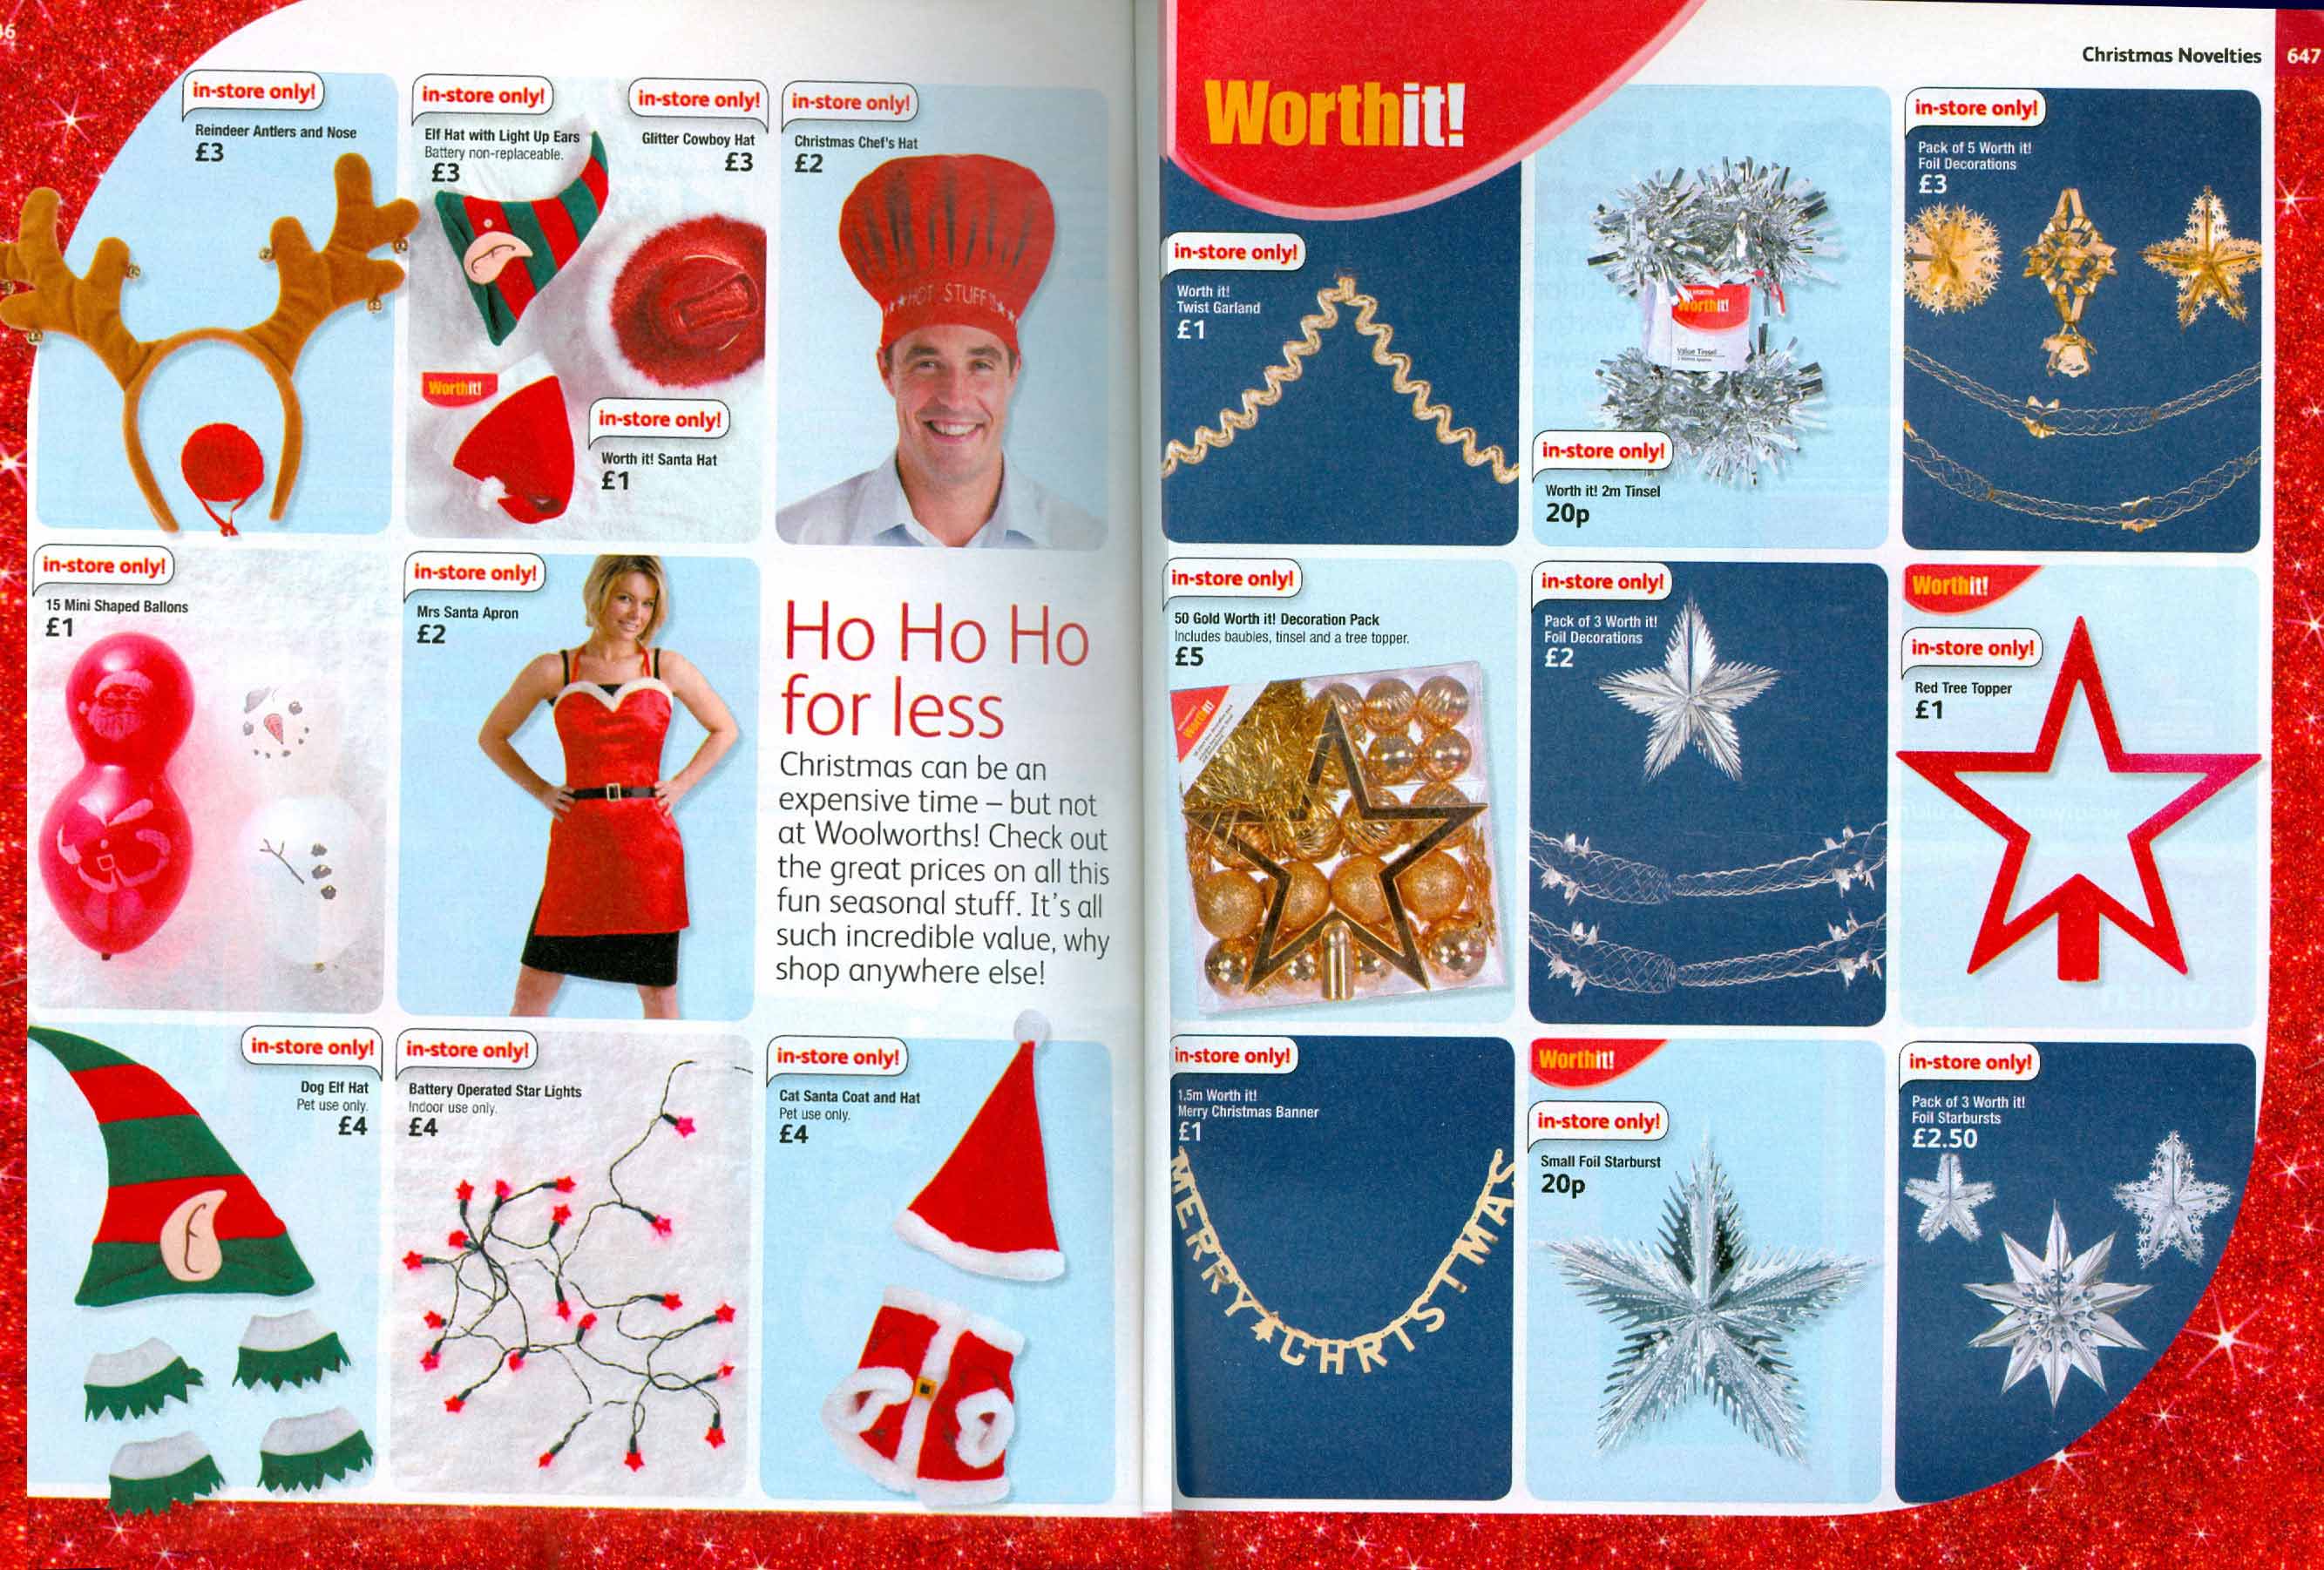 WorthIt! Christmas Decorations in the Big Red Book Catalogue ...